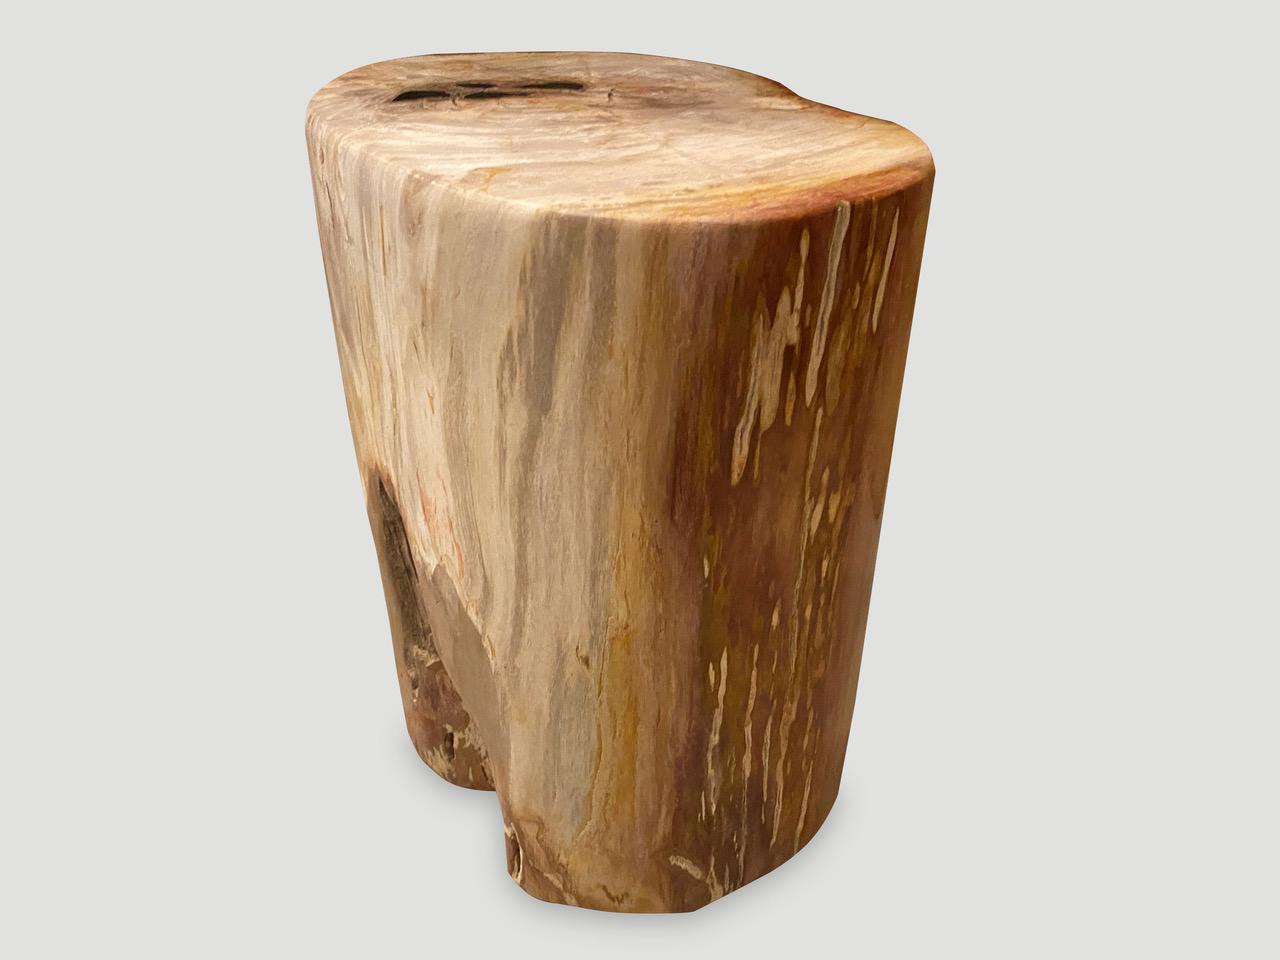 Organic Modern Andrianna Shamaris Coral Toned High Quality Petrified Wood Side Table For Sale